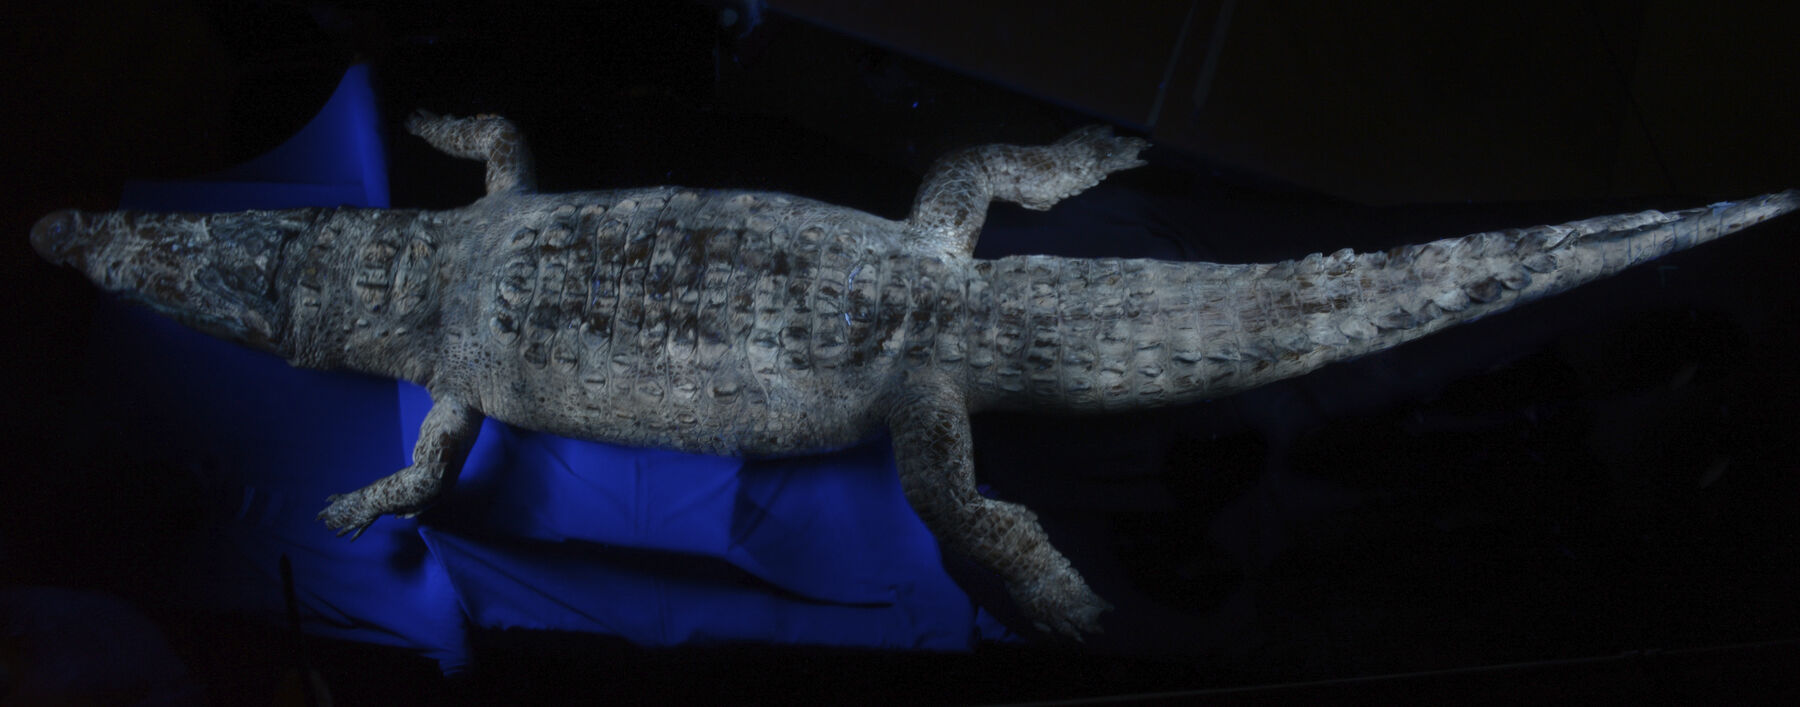 A taxidermied crocodile being displayed under ultraviolet light